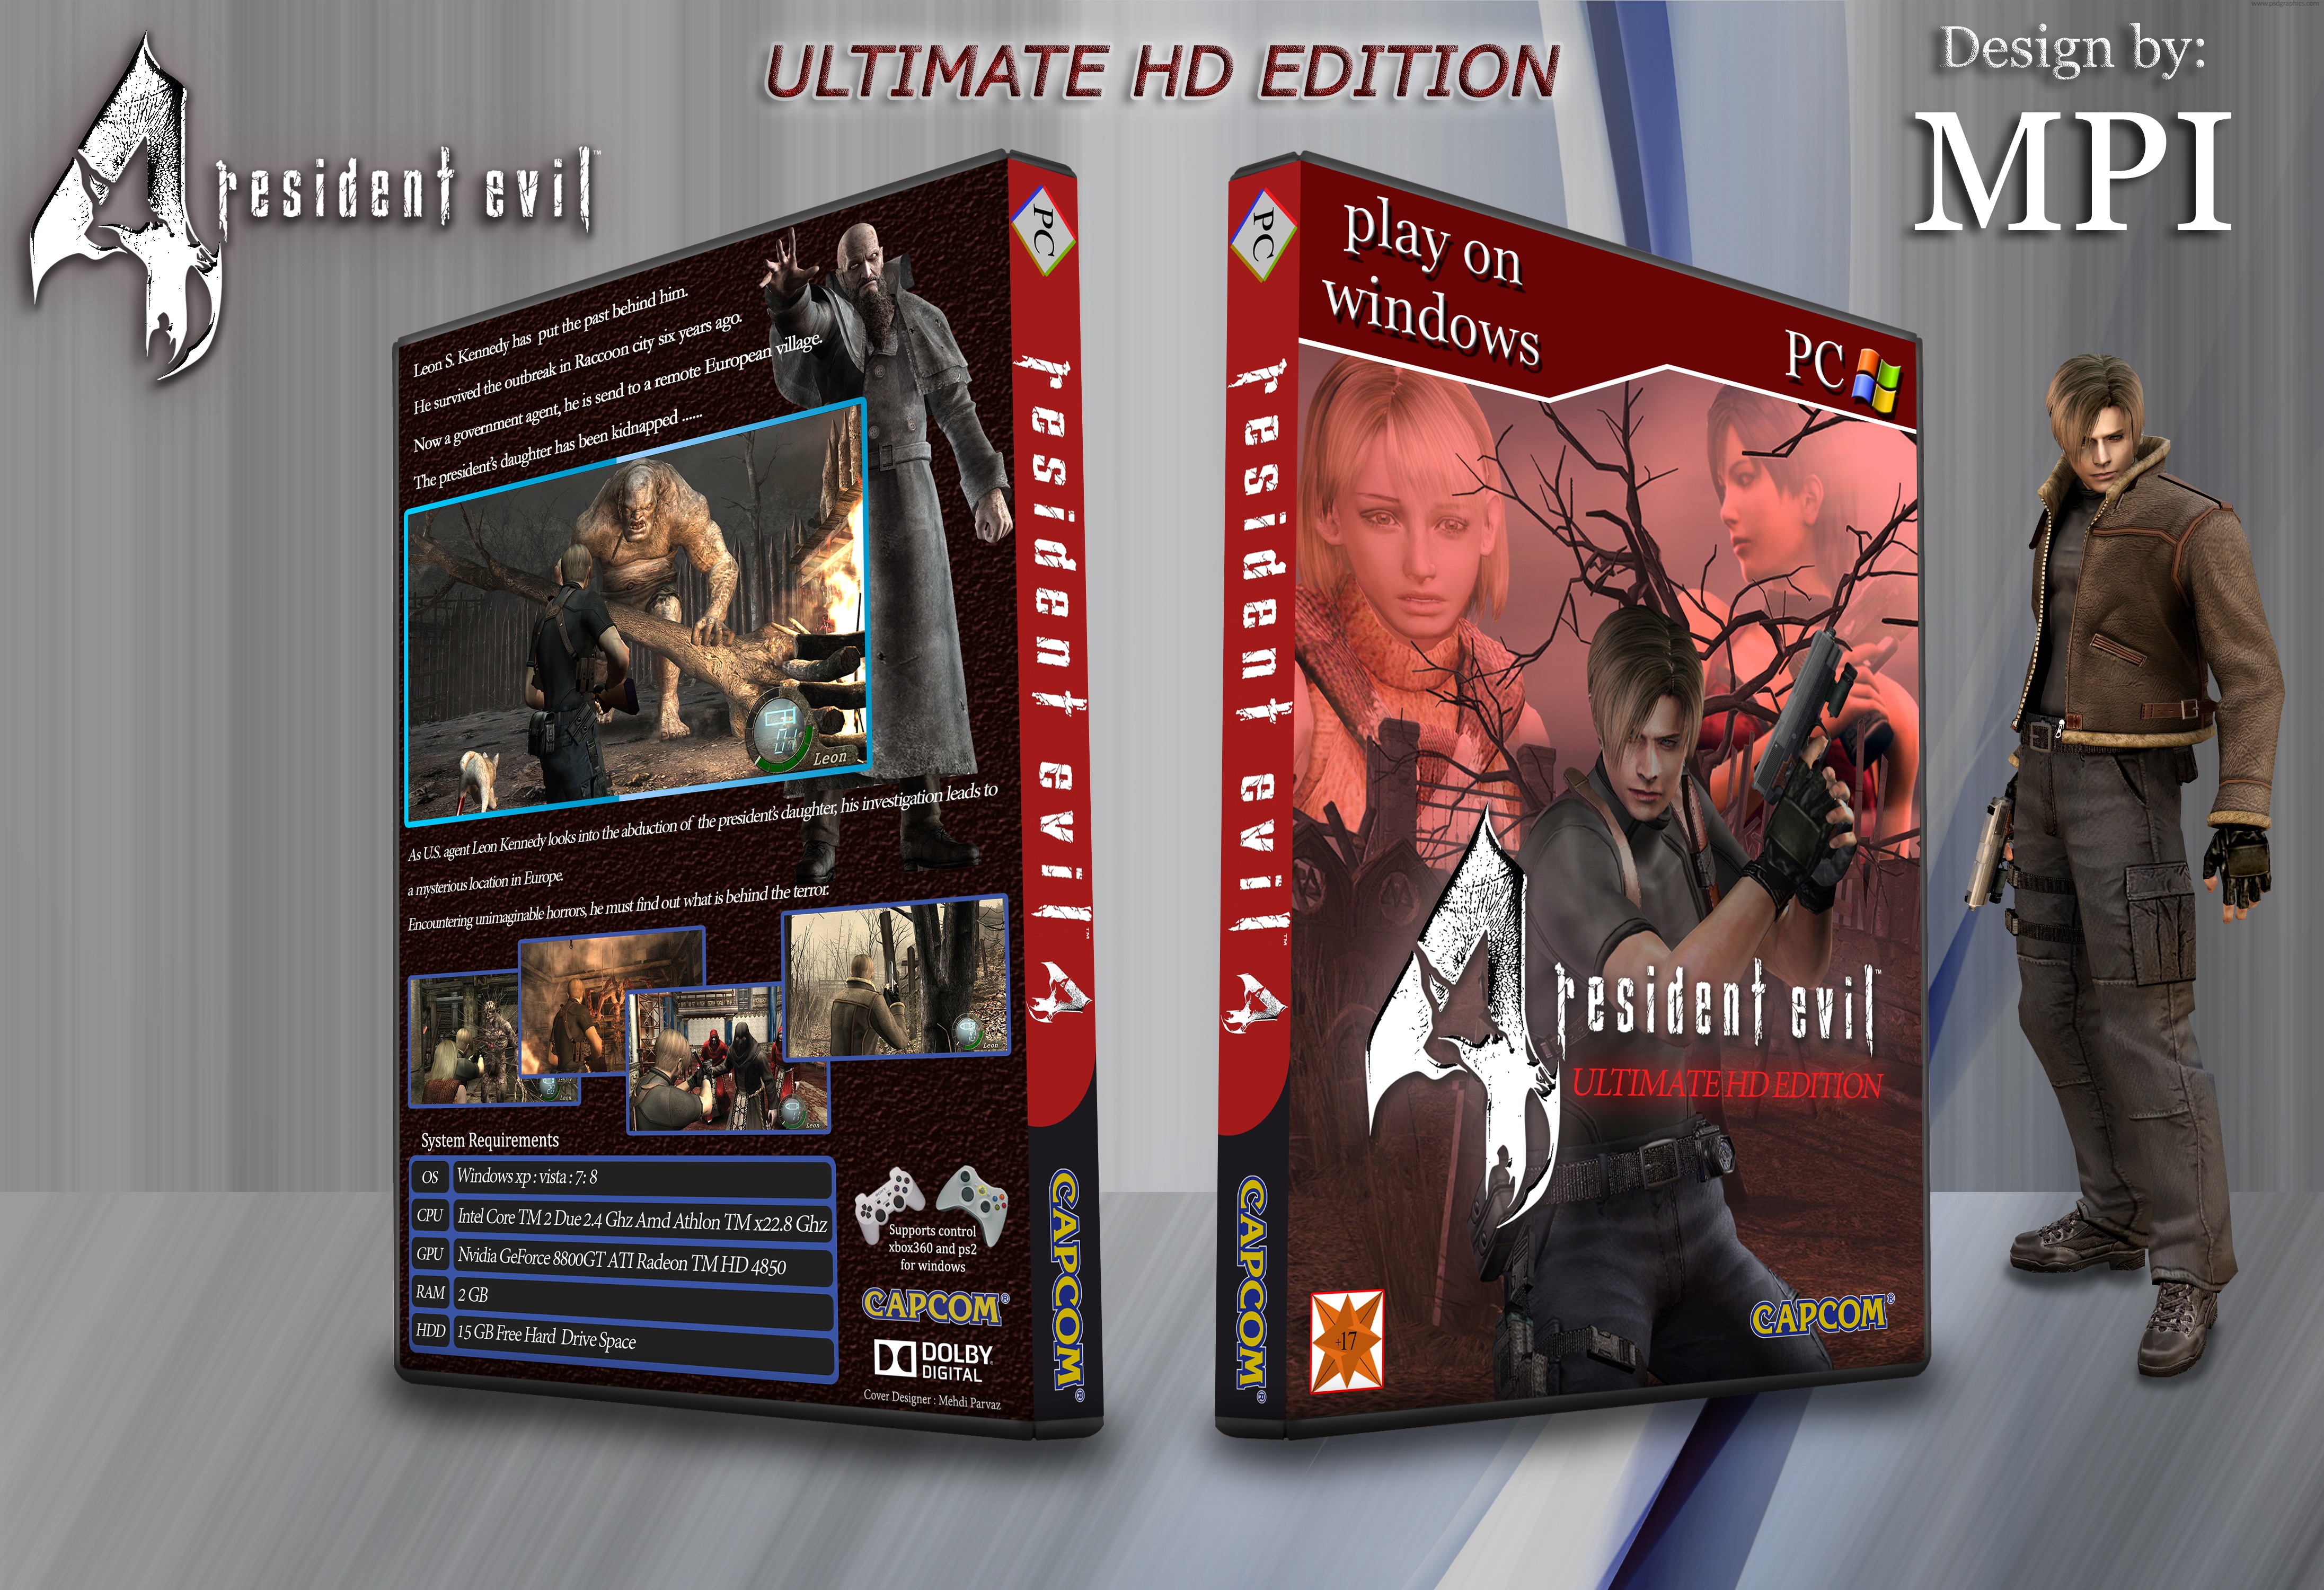 Resident Evil Ultimate HD Edition box cover